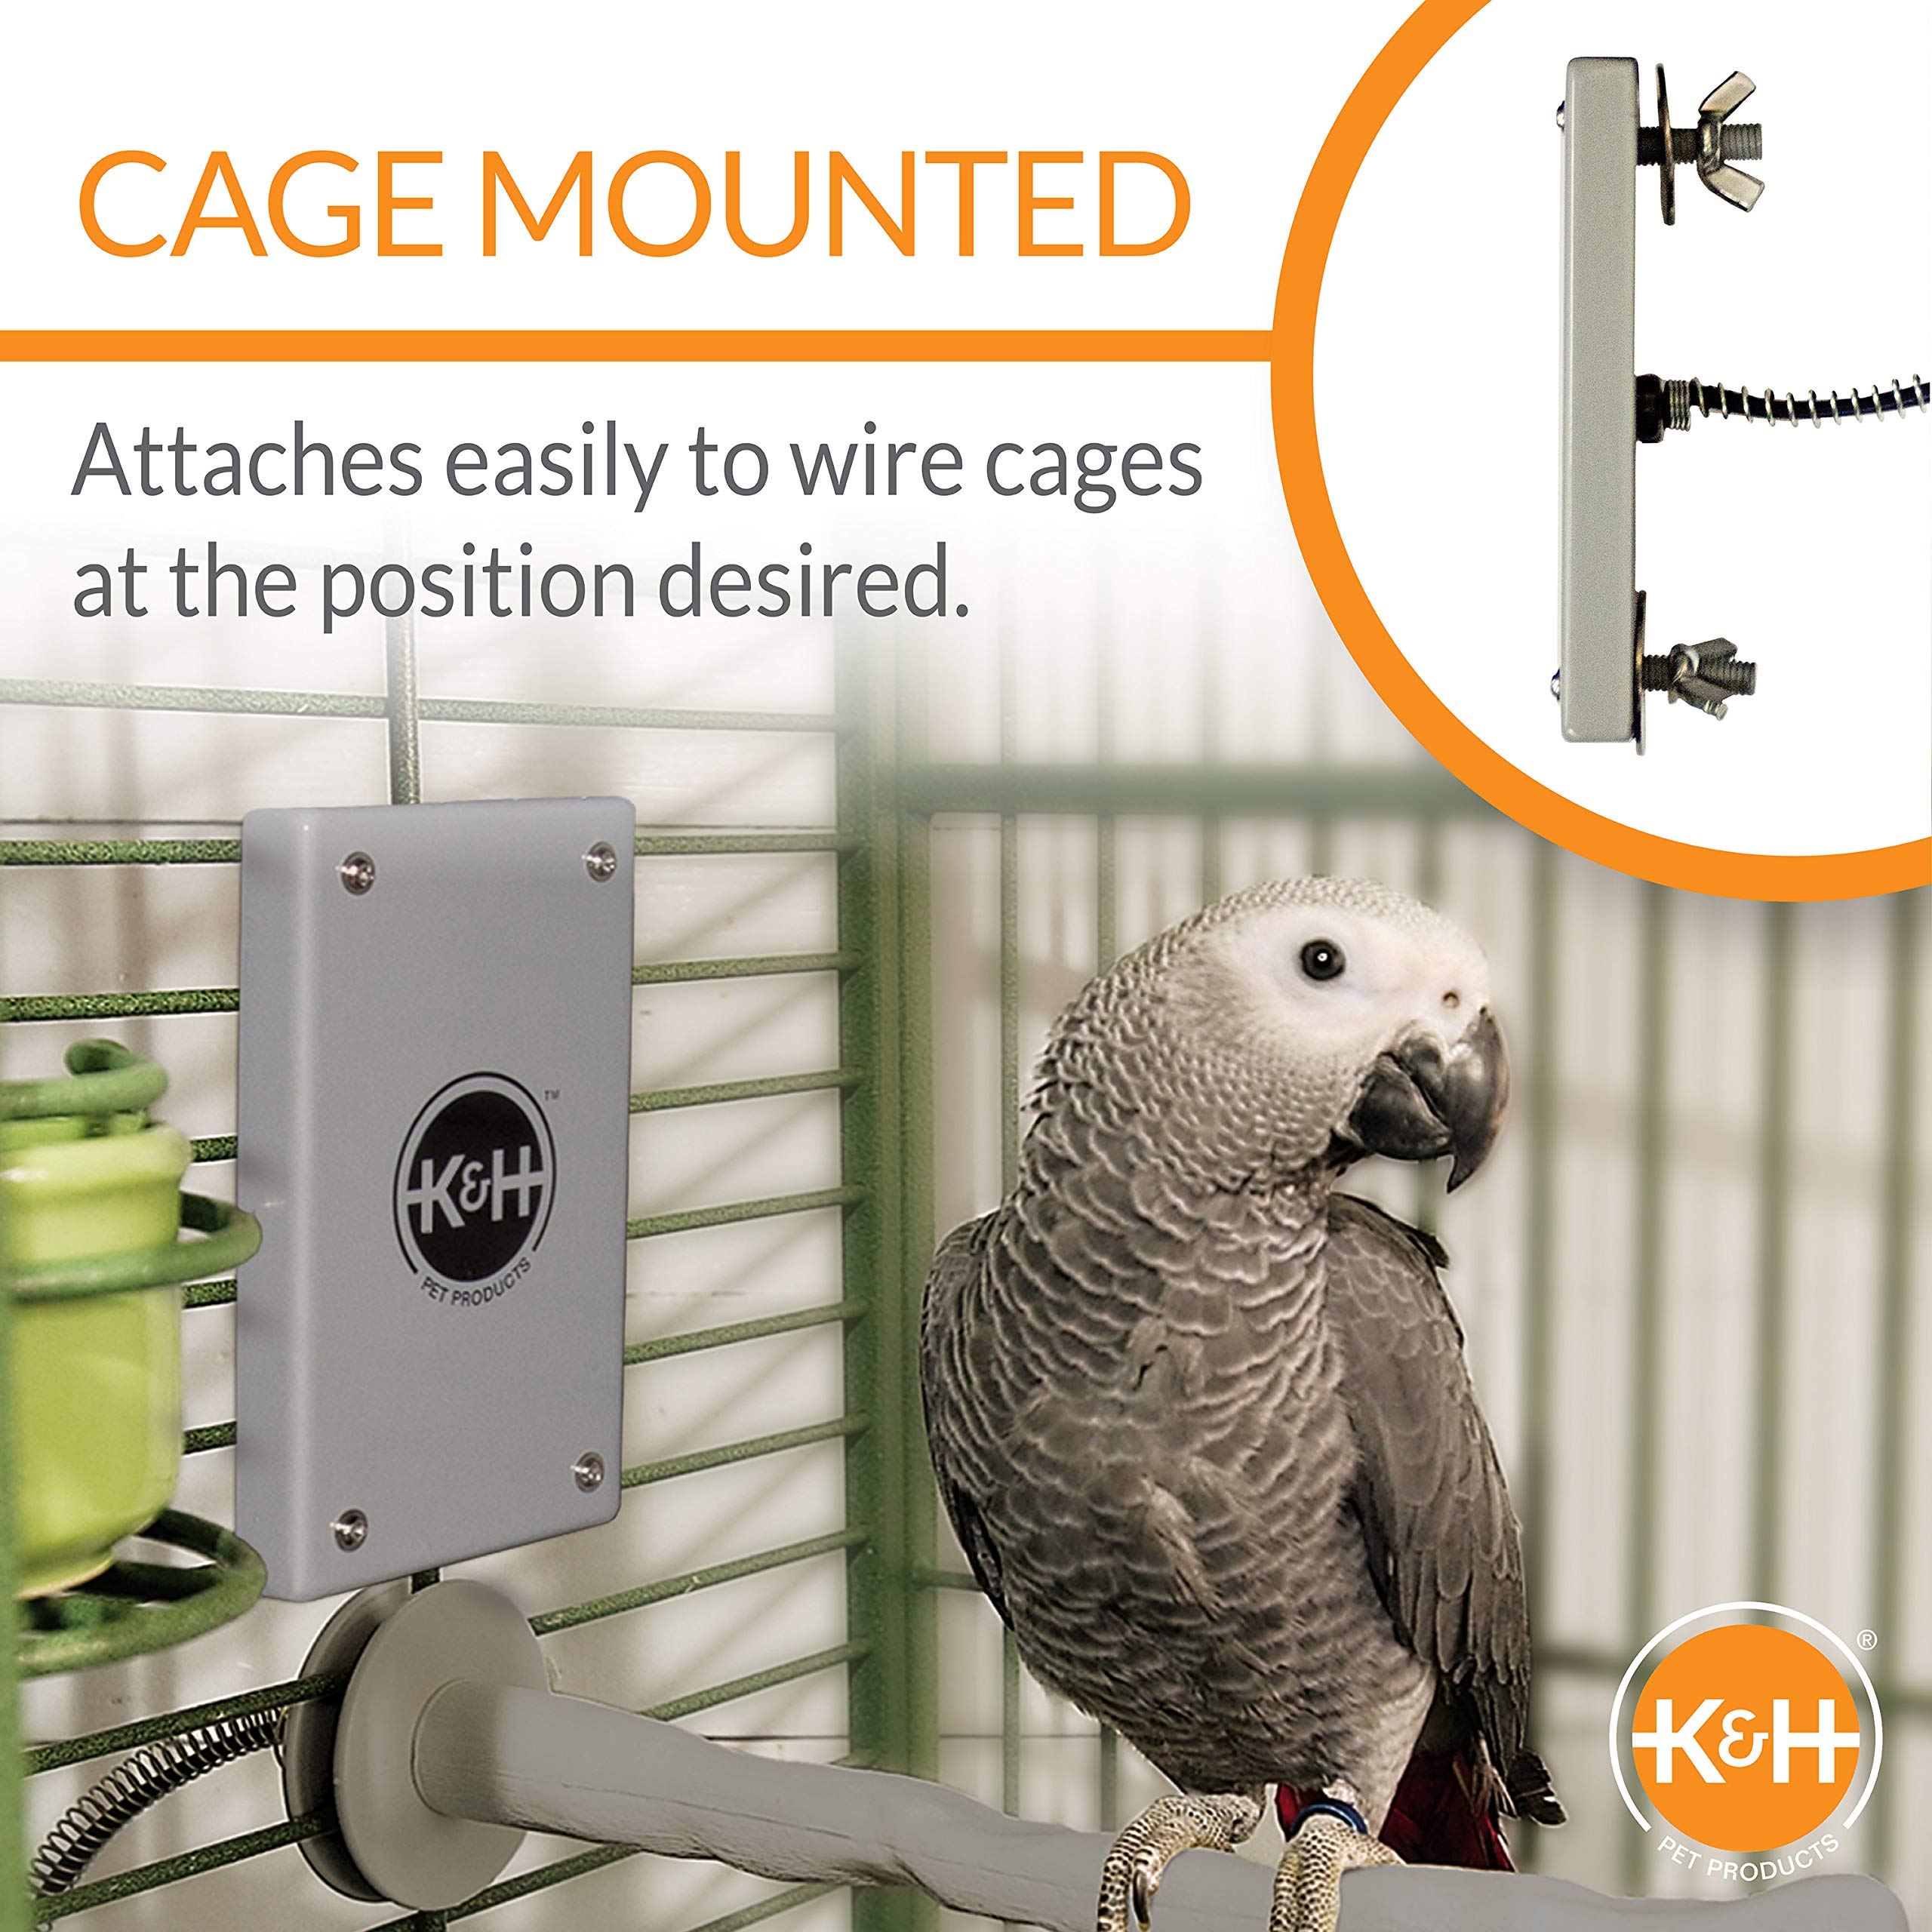 K&H Pet Products Snuggle-Up Bird Warmer - 12 Volt Gray Small 3 X 5 Inches